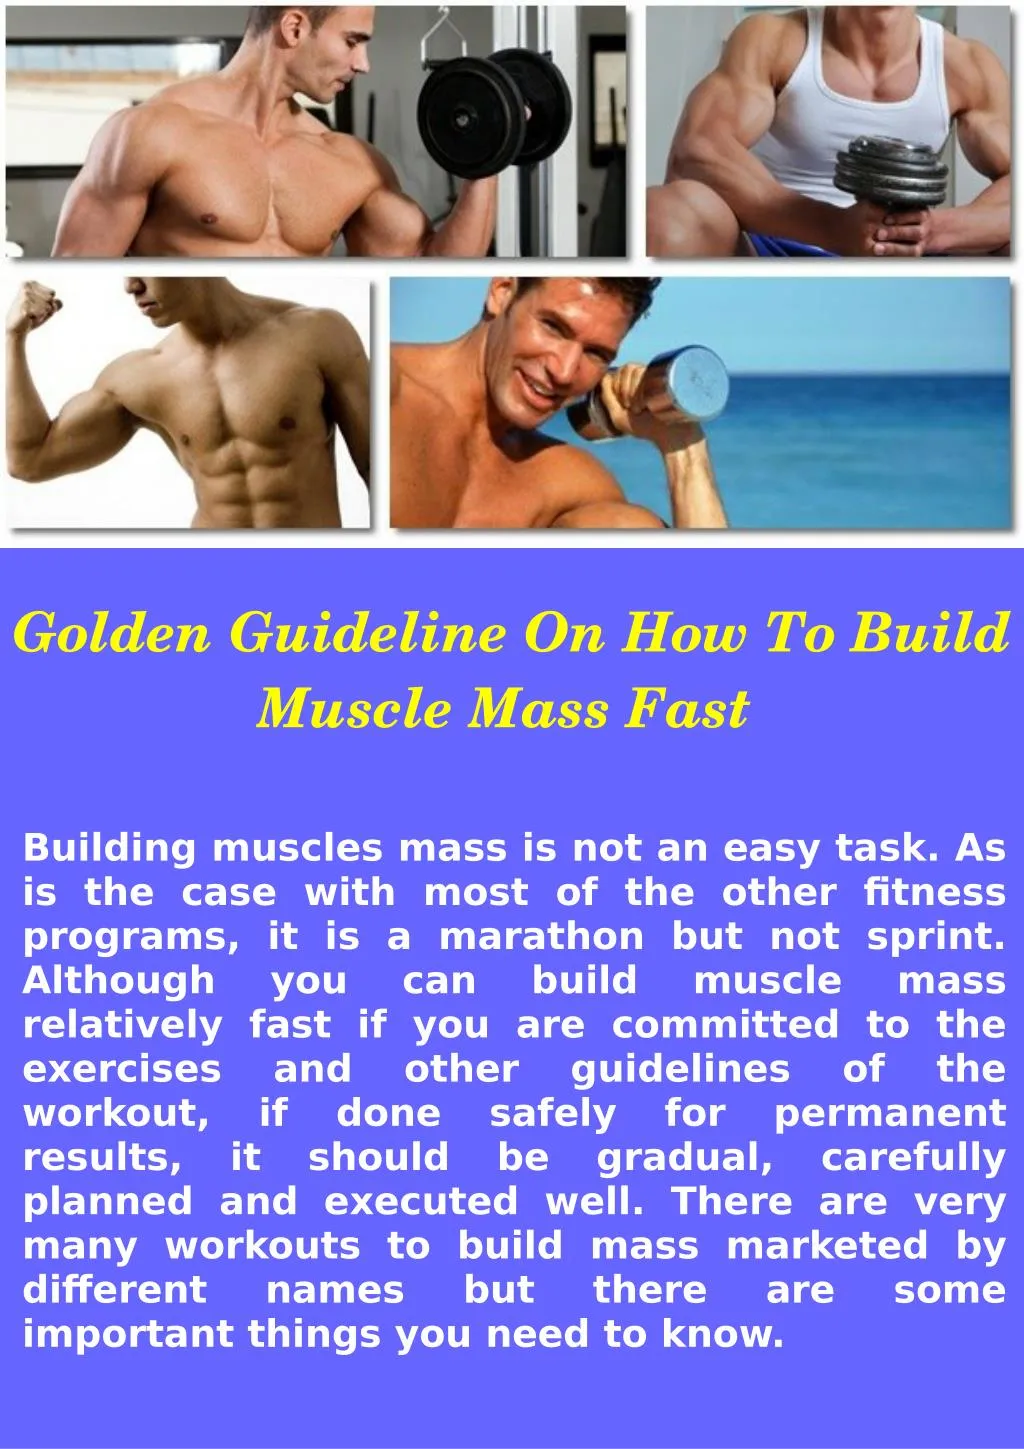 golden guideline on how to build muscle mass fast